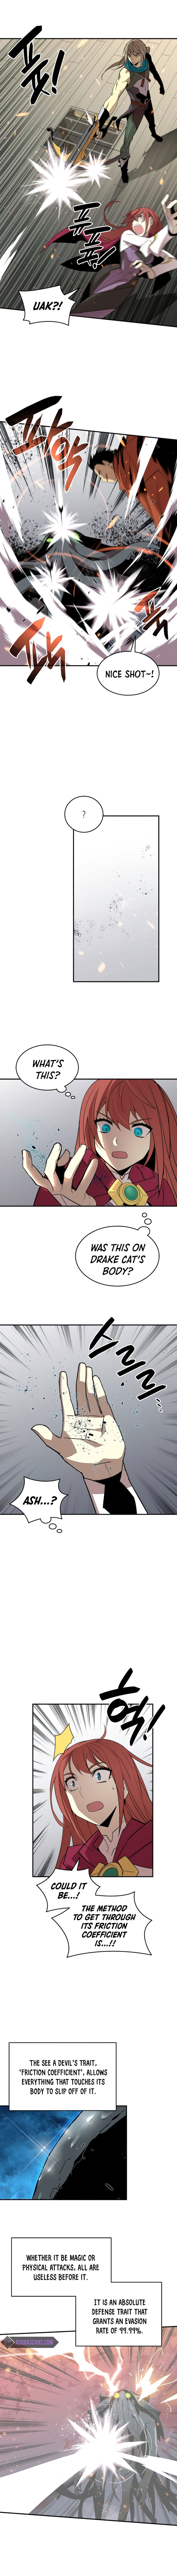 Worn and Torn Newbie - Chapter 63 Page 5